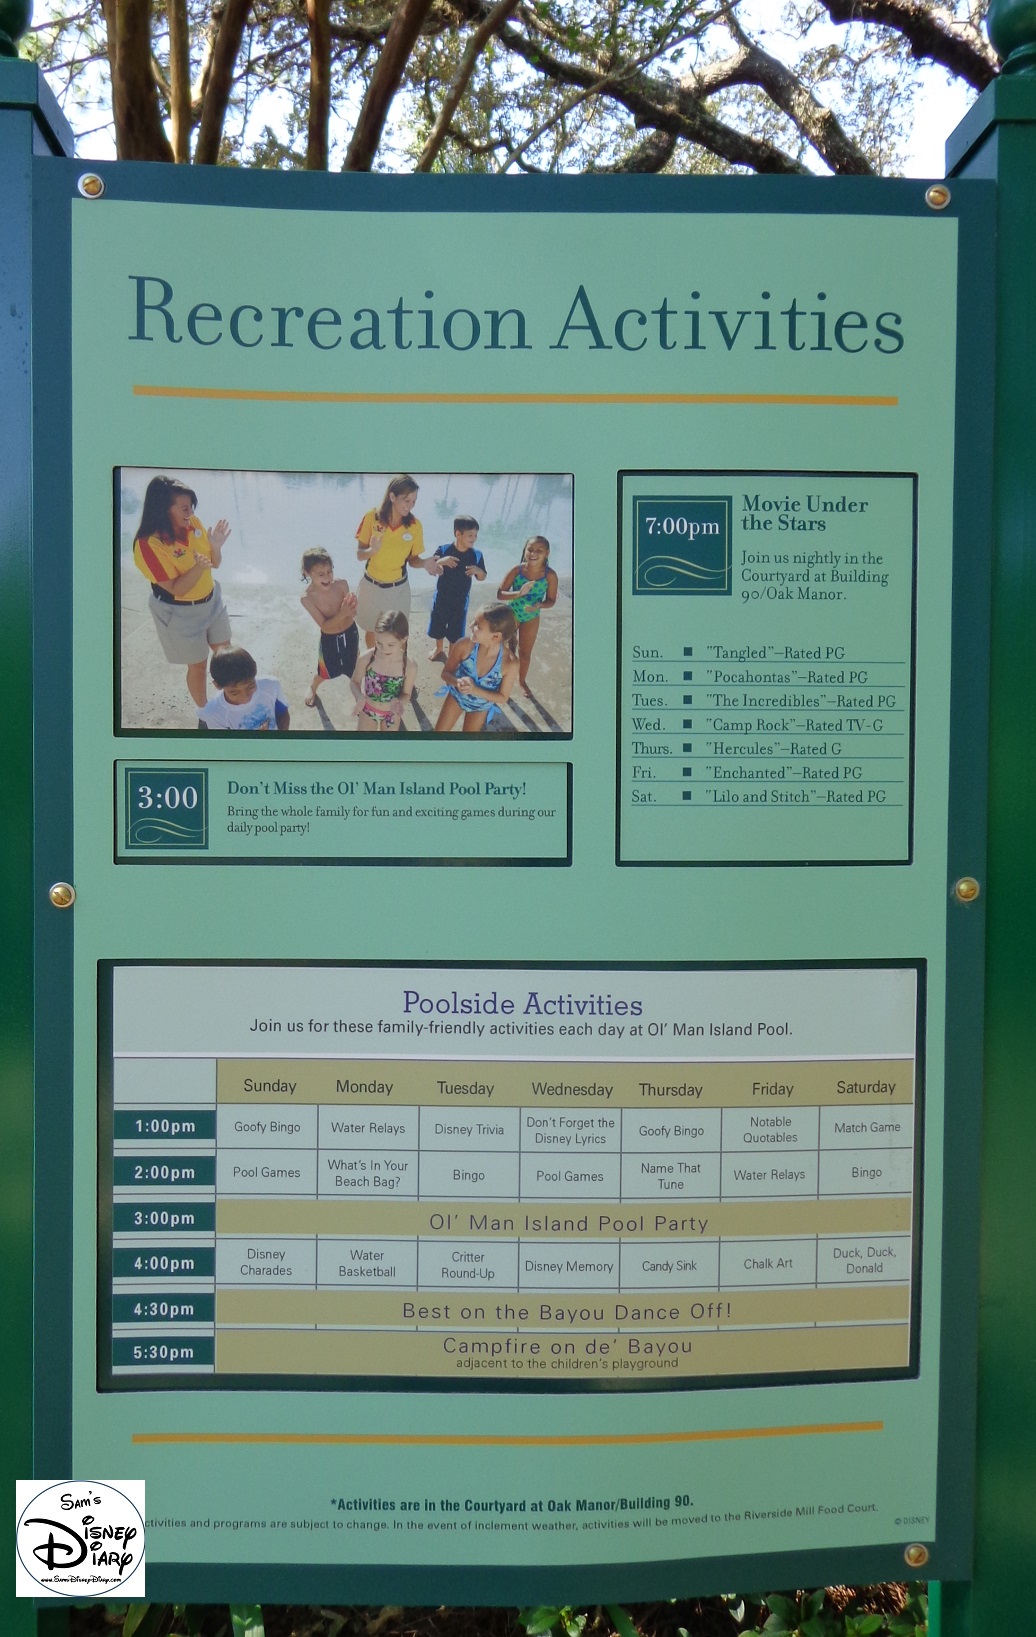 Port Orleans Riverside be sure to check the Recreation Activities schedule.